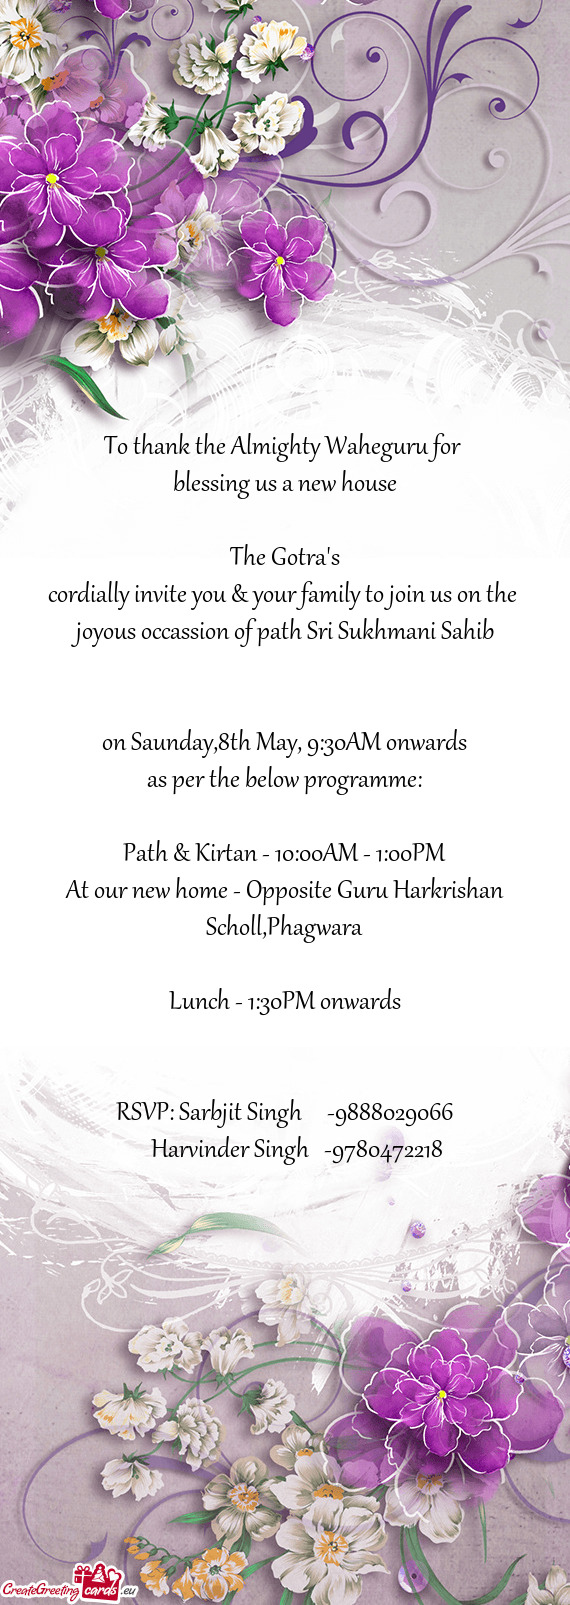 On Saunday,8th May, 9:30AM onwards